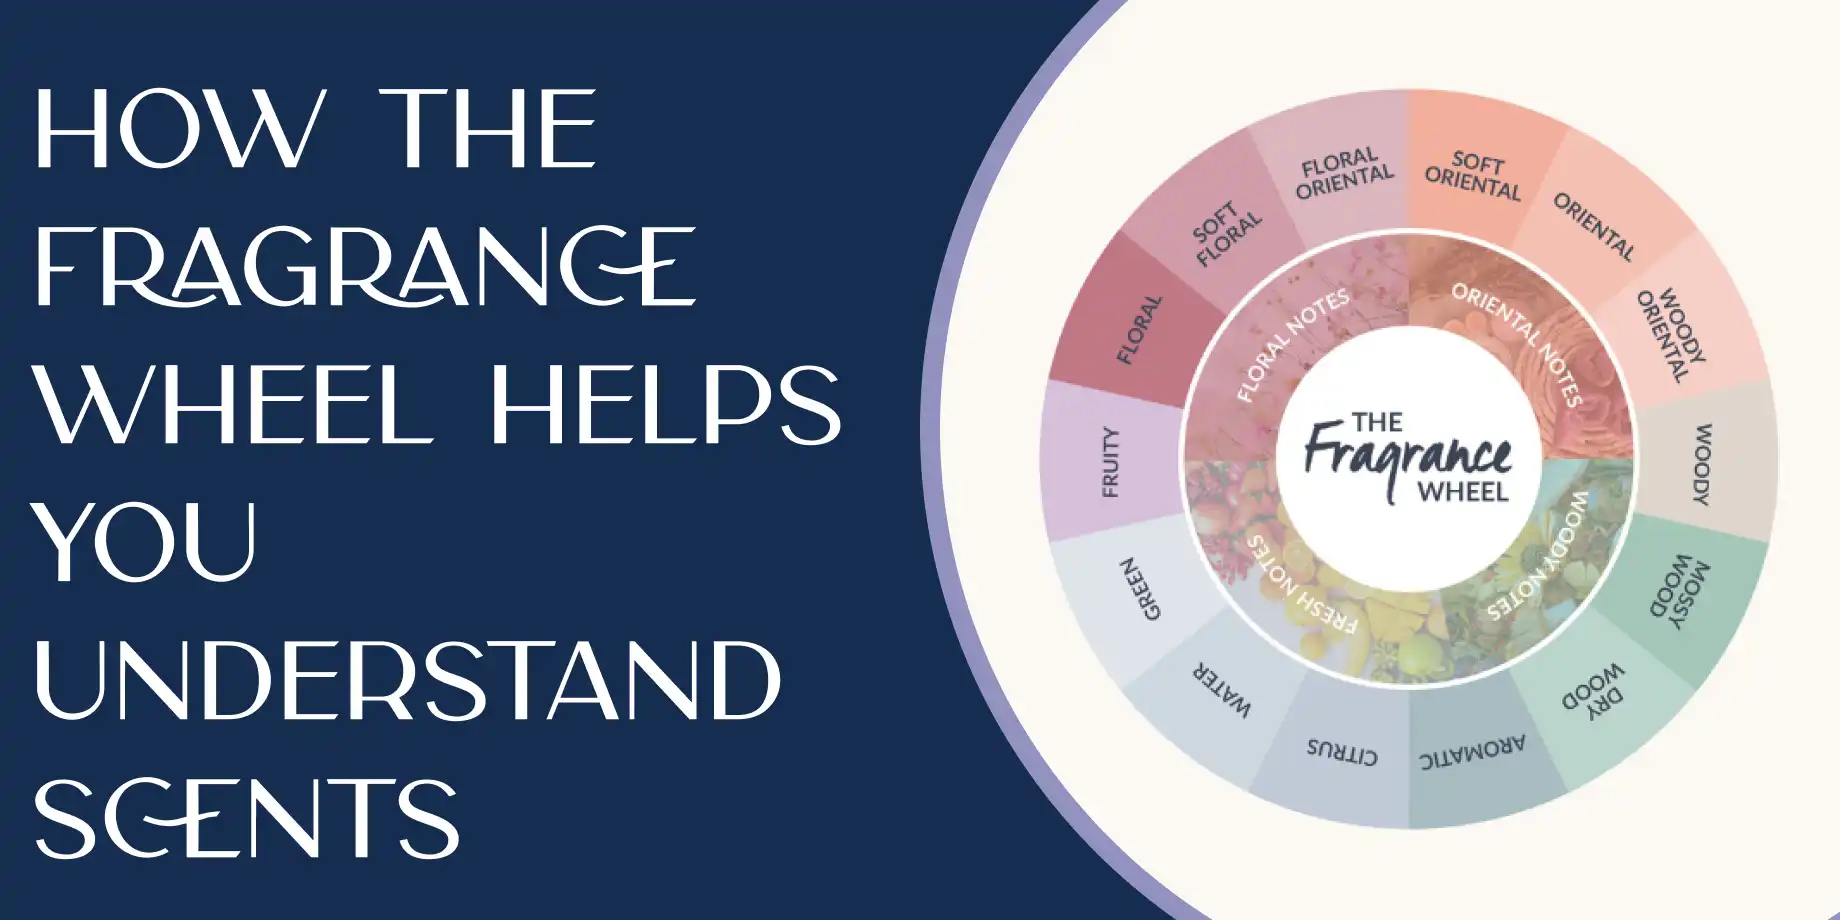 How the Fragrance Wheel Helps You Understand Scents